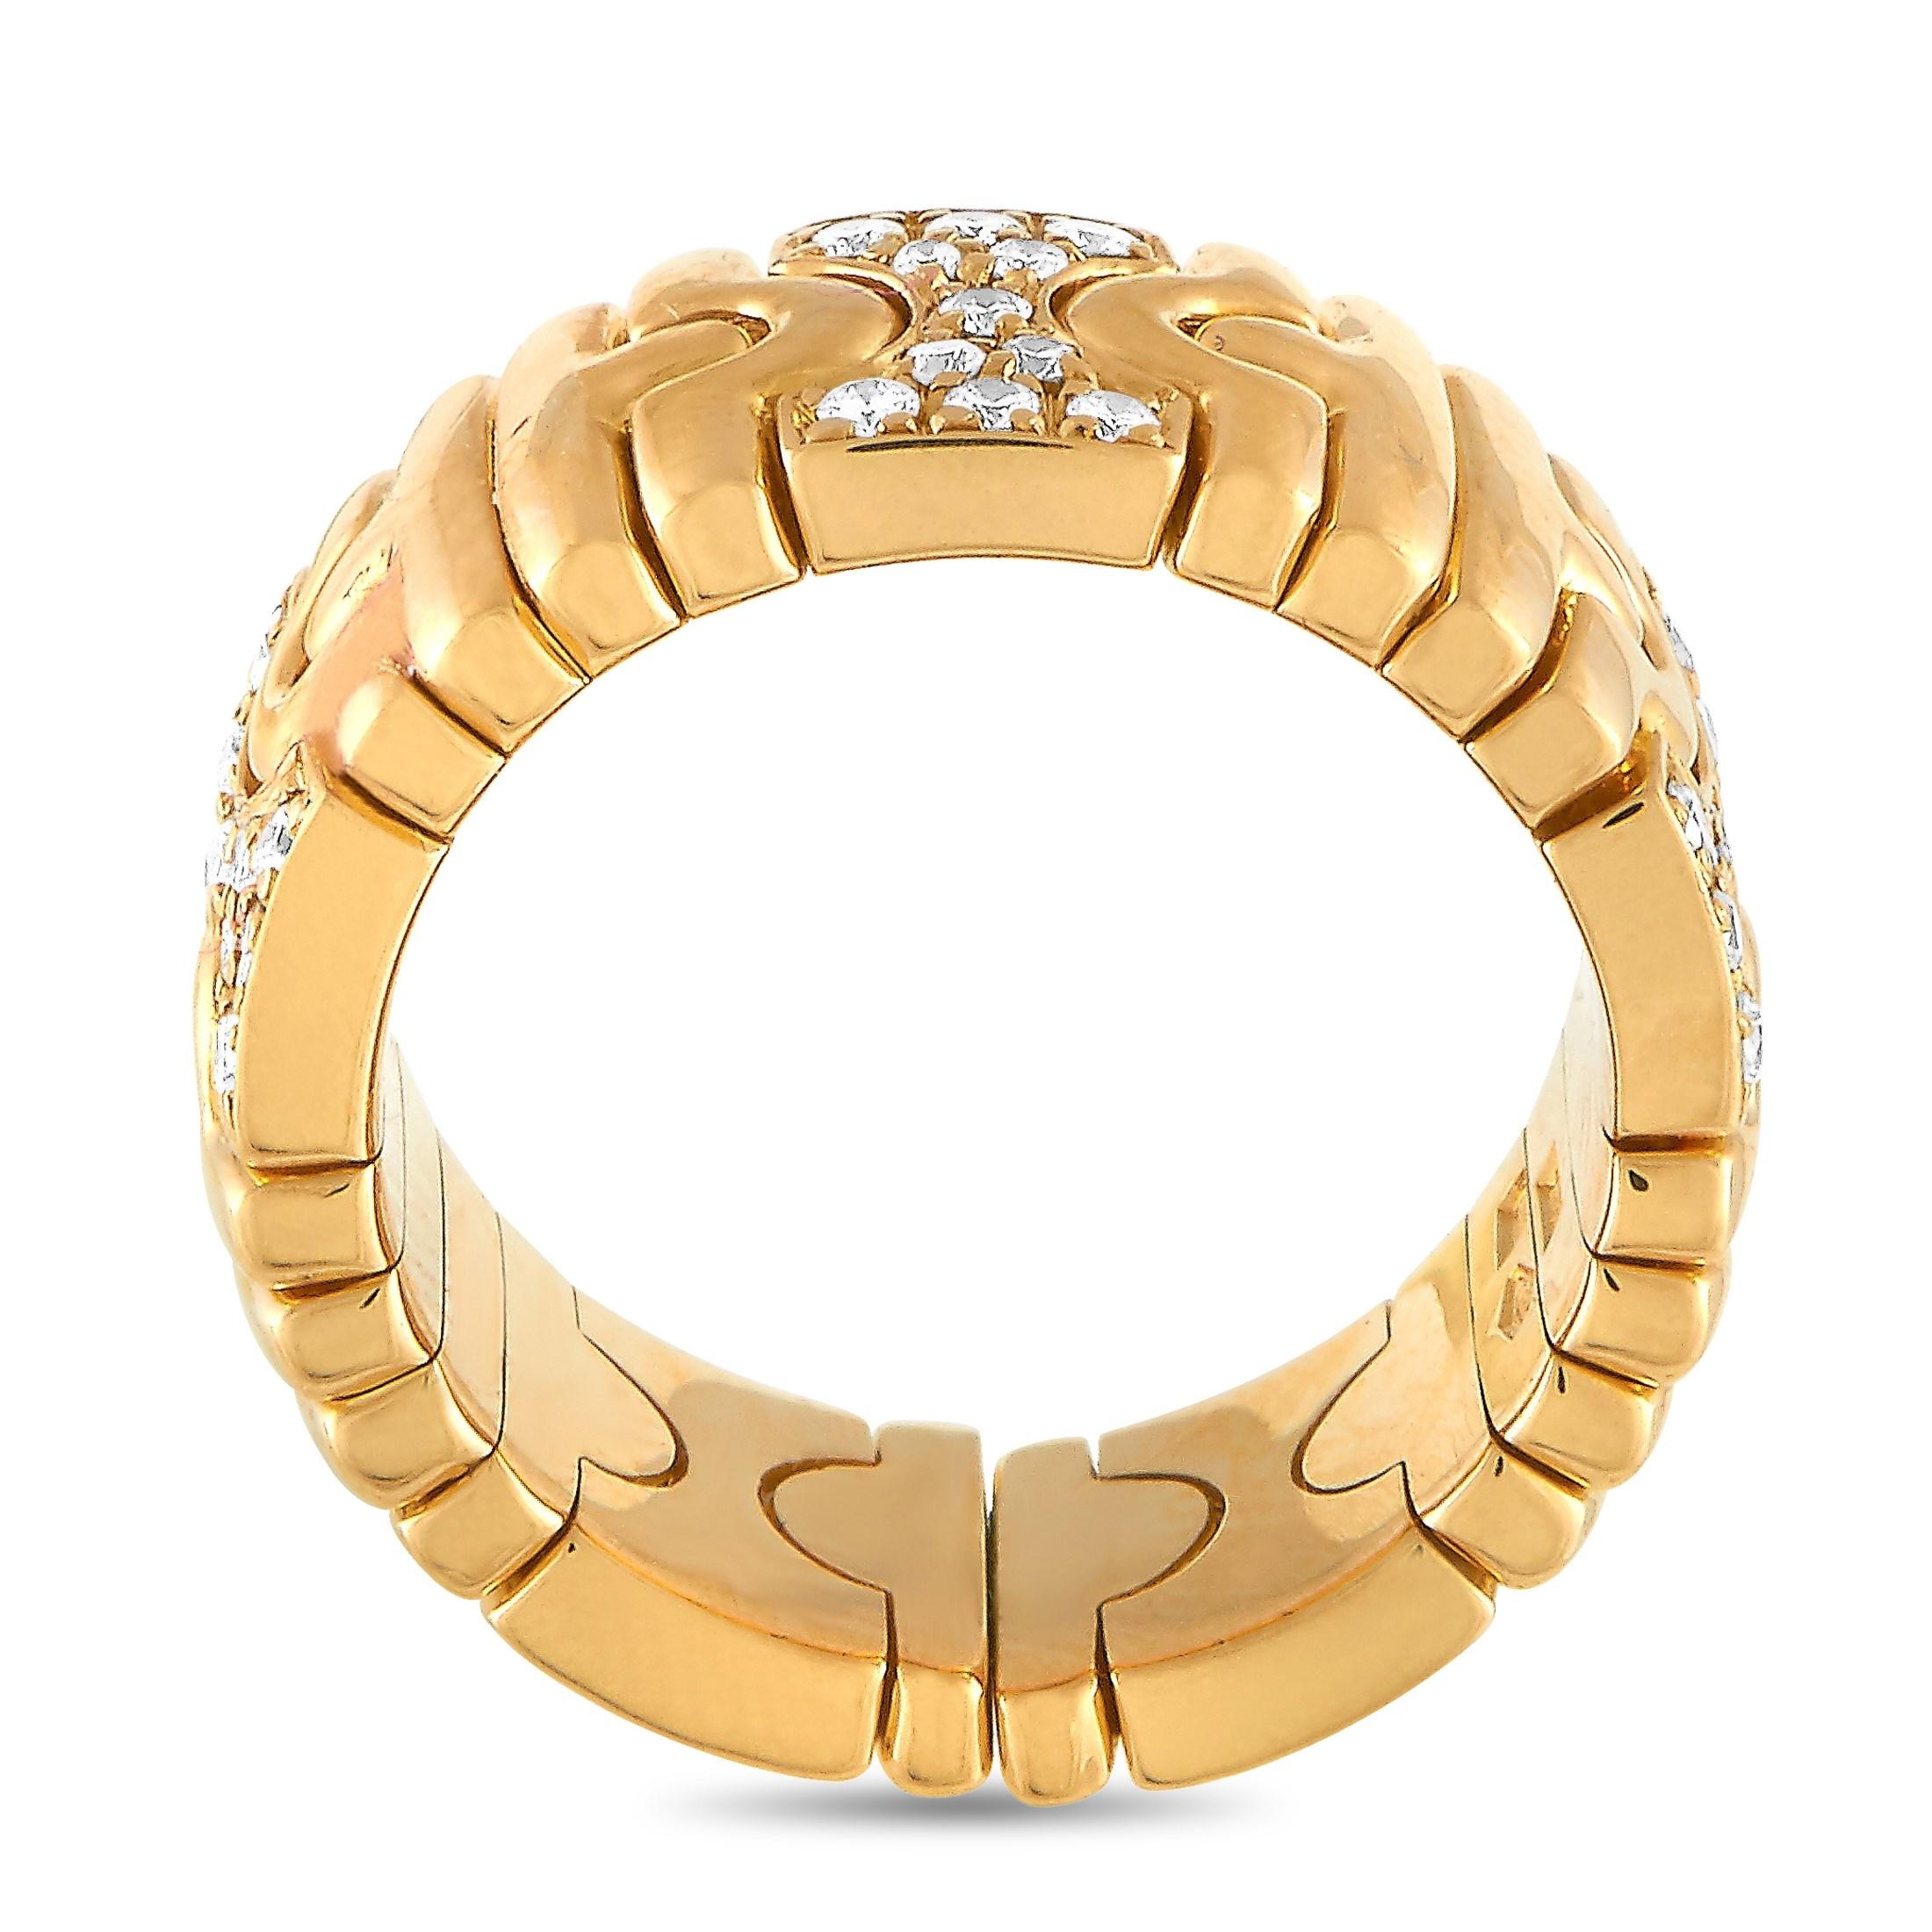 The Bvlgari “Parentesi” ring is made of 18K yellow gold and embellished with diamonds. The ring weighs 15.5 grams and boasts band thickness of 8 mm and top height of 8 mm, while top dimensions measure 8 by 20 mm.

This jewelry piece is offered in